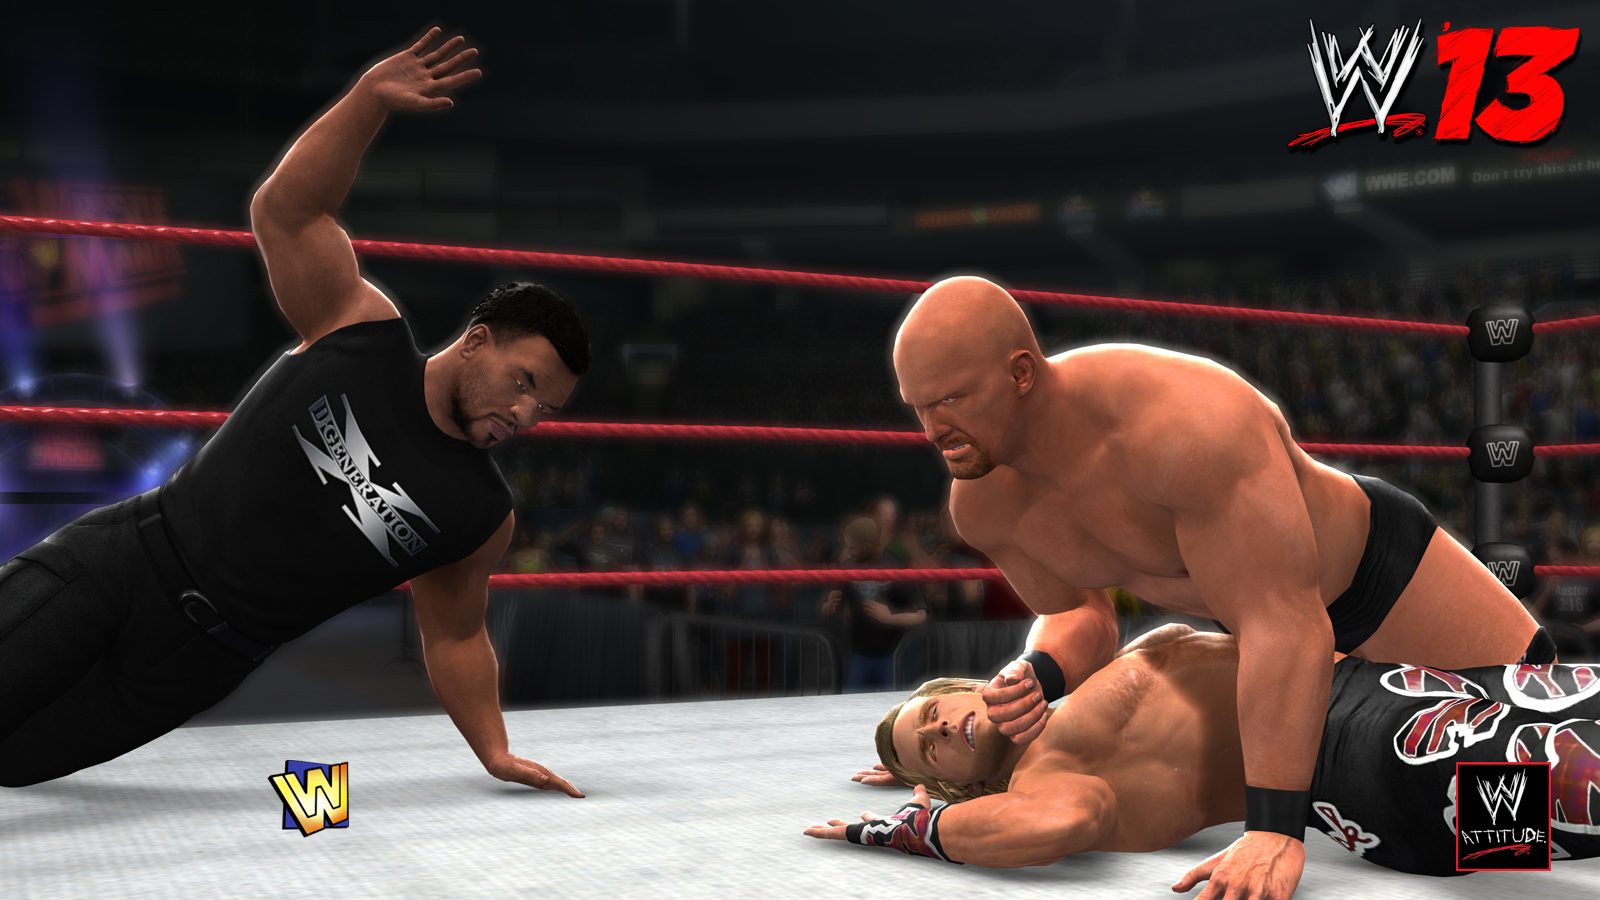 Wwe 13 Pc Game Free Download Torrents